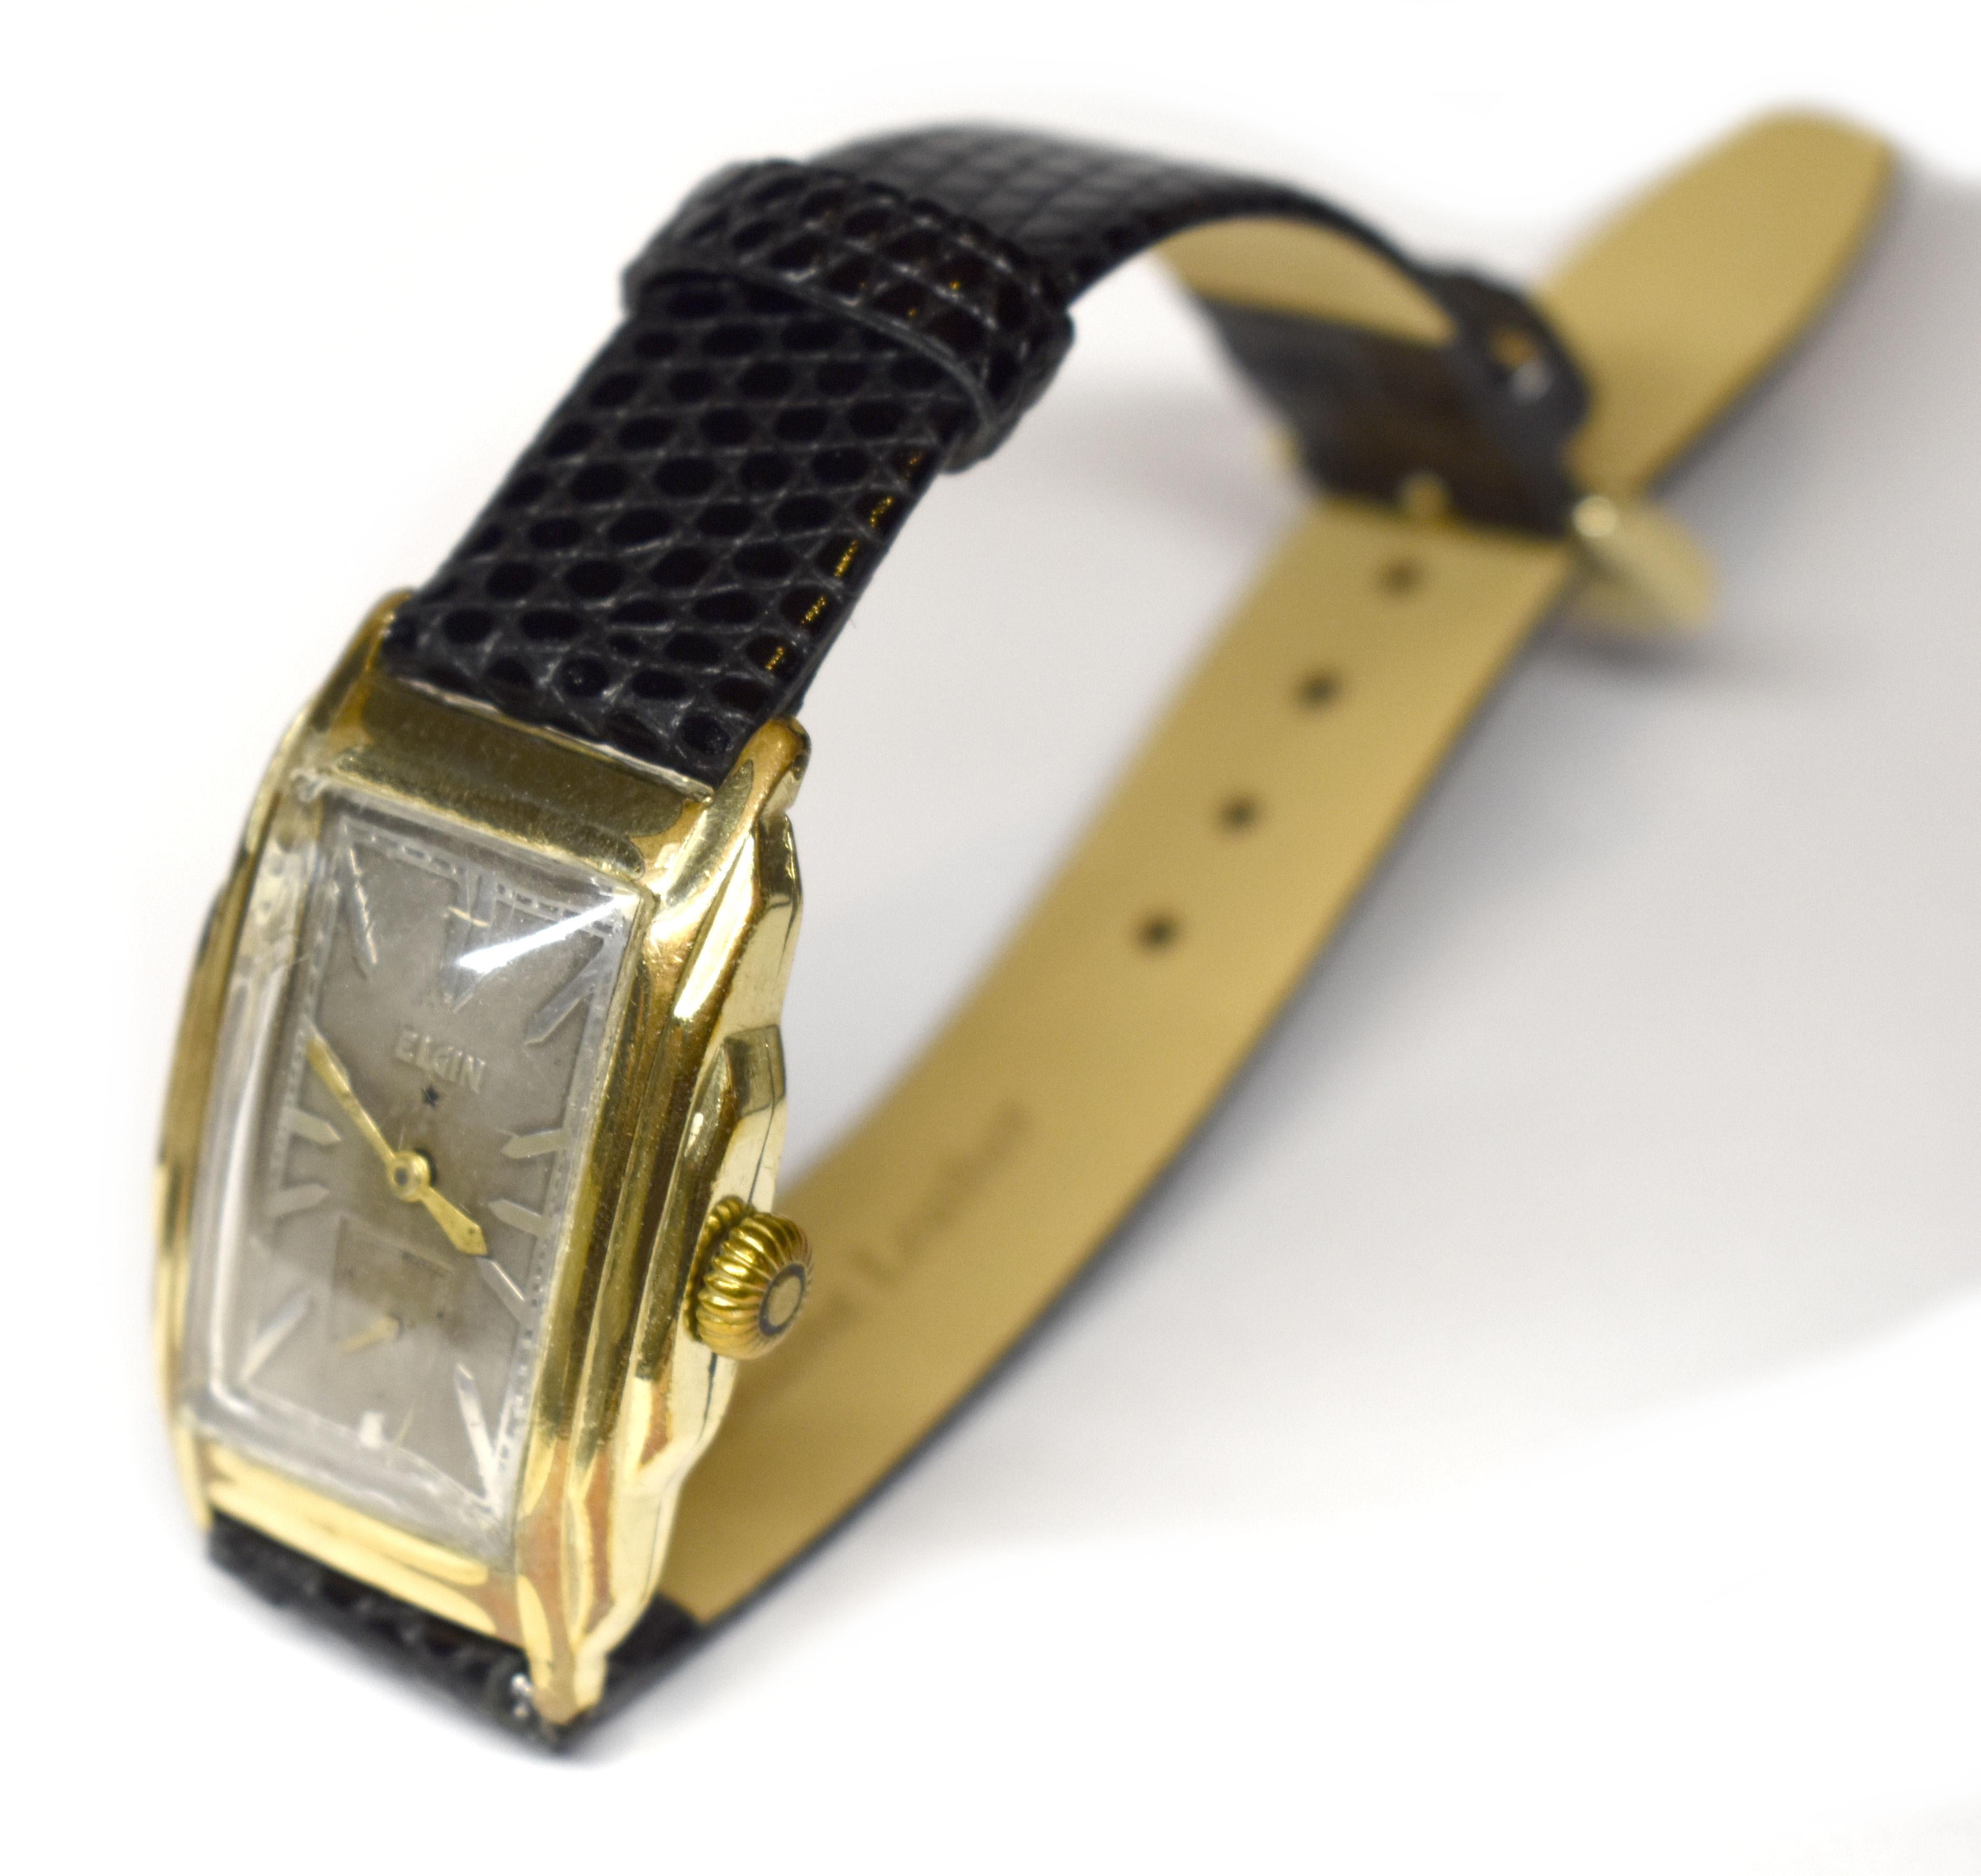 For your consideration is this beautifully restored gents wrist watch by the American watch company Elgin. On first viewing one can't not be impressed by the dial, for a 90 year old watch it's excellent, yet totally original and untouched aside a